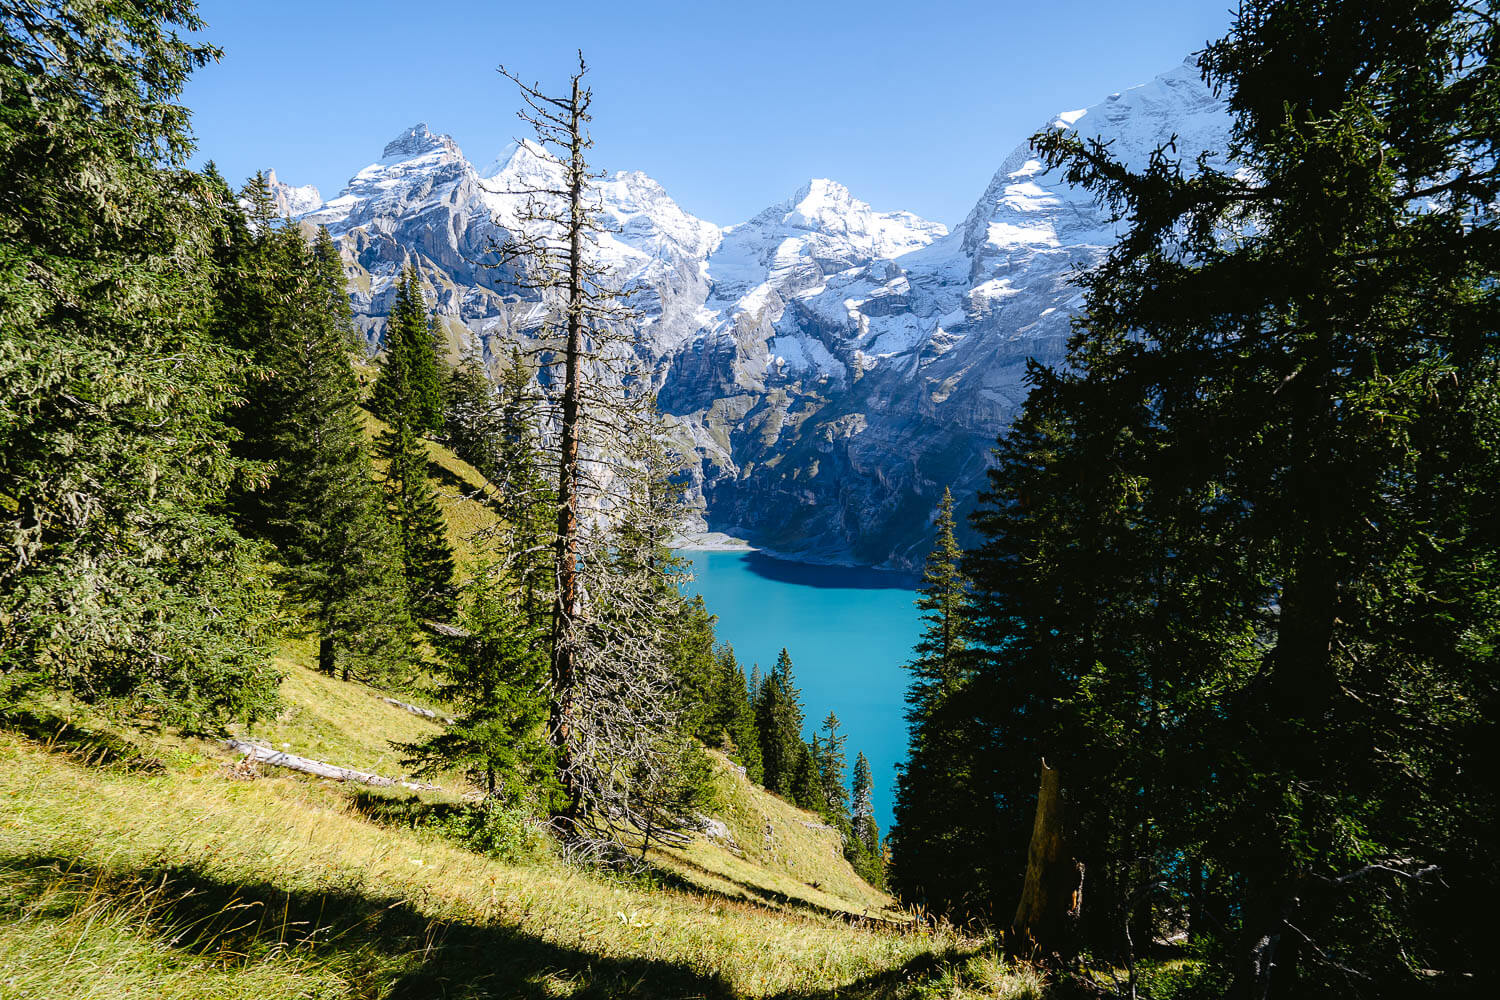 The first view of the Oeschinensee